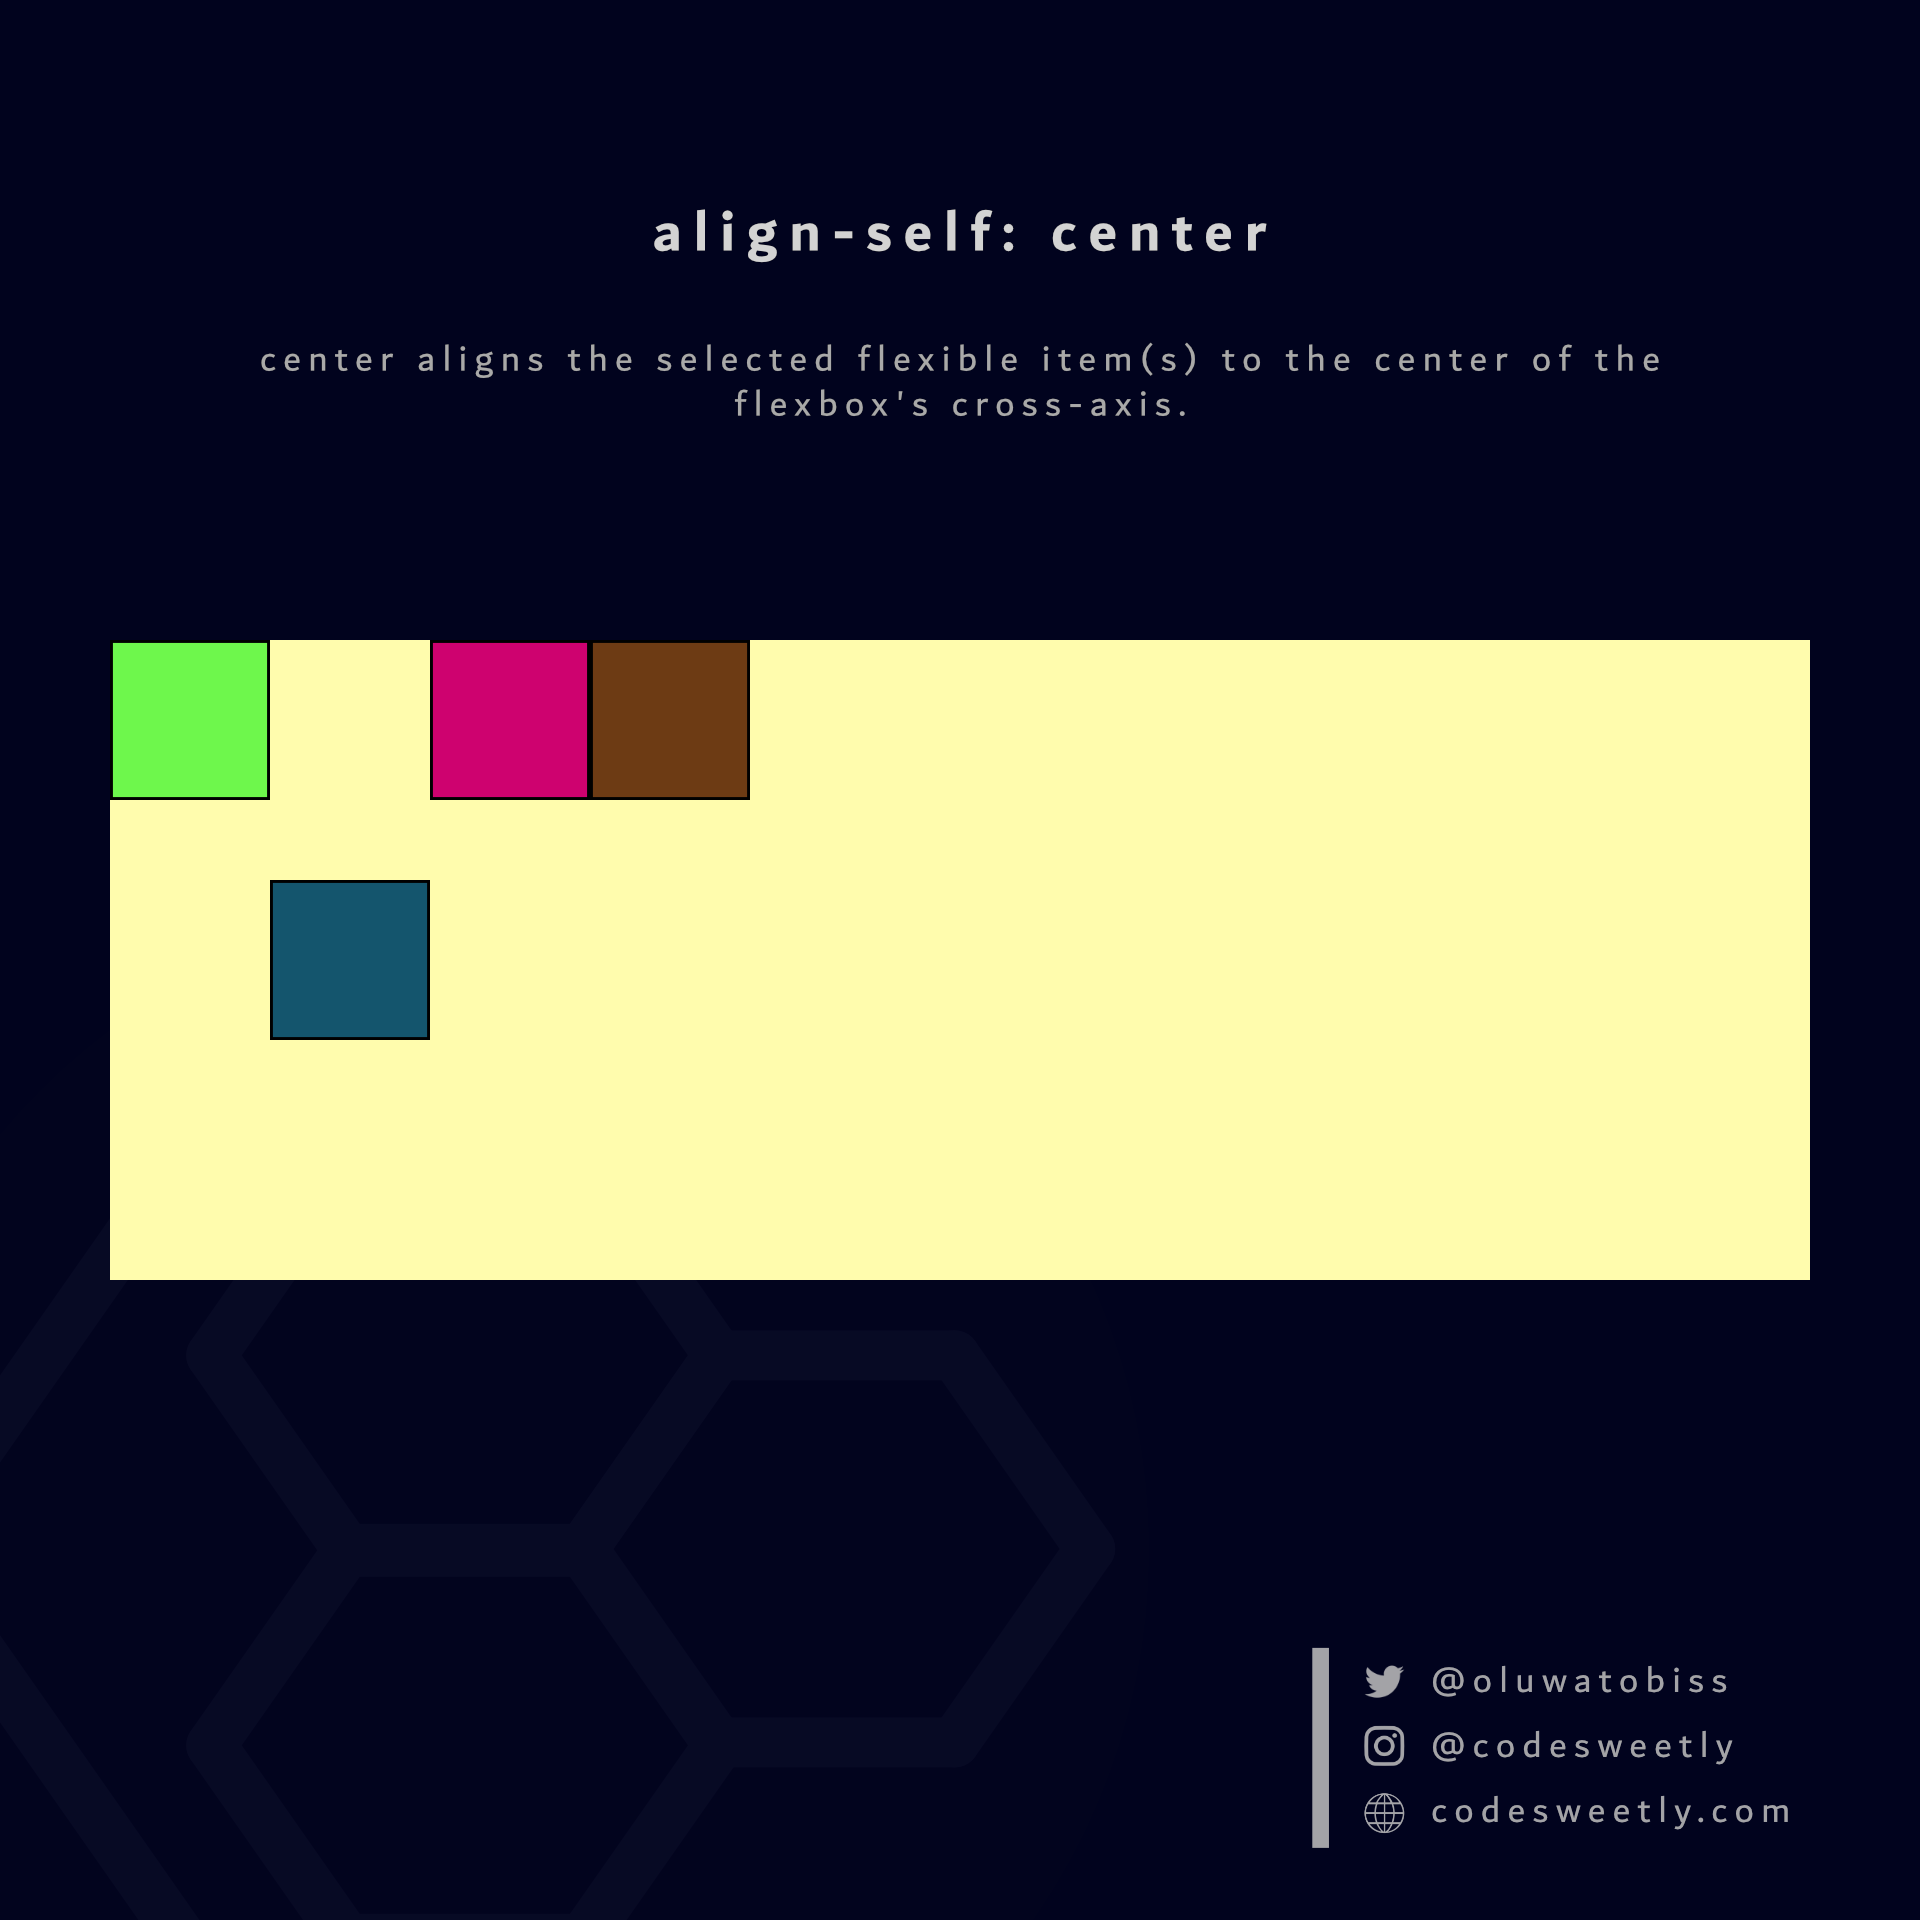 align-self's center value aligns the selected flexible items to the center of the flexbox's cross-axis